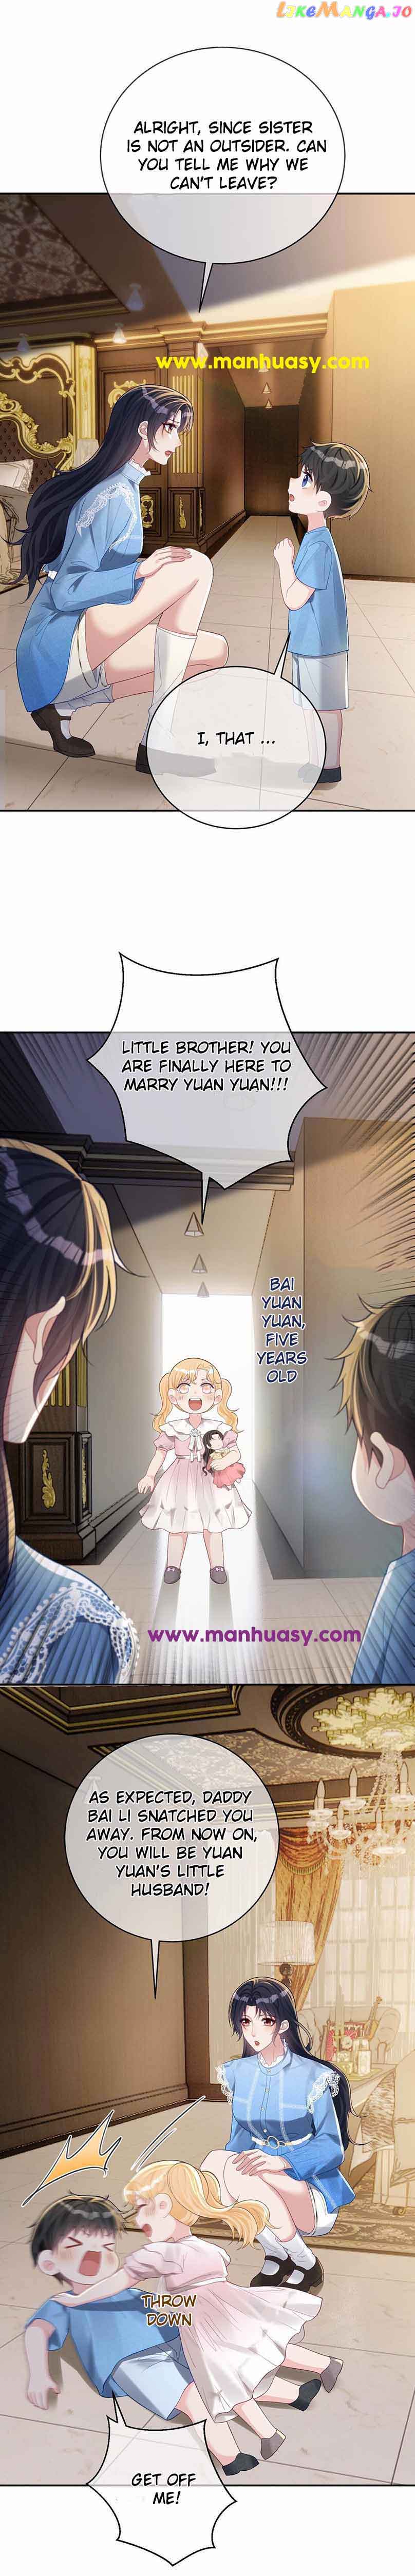 Cute Baby From Heaven: Daddy is Too Strong chapter 64